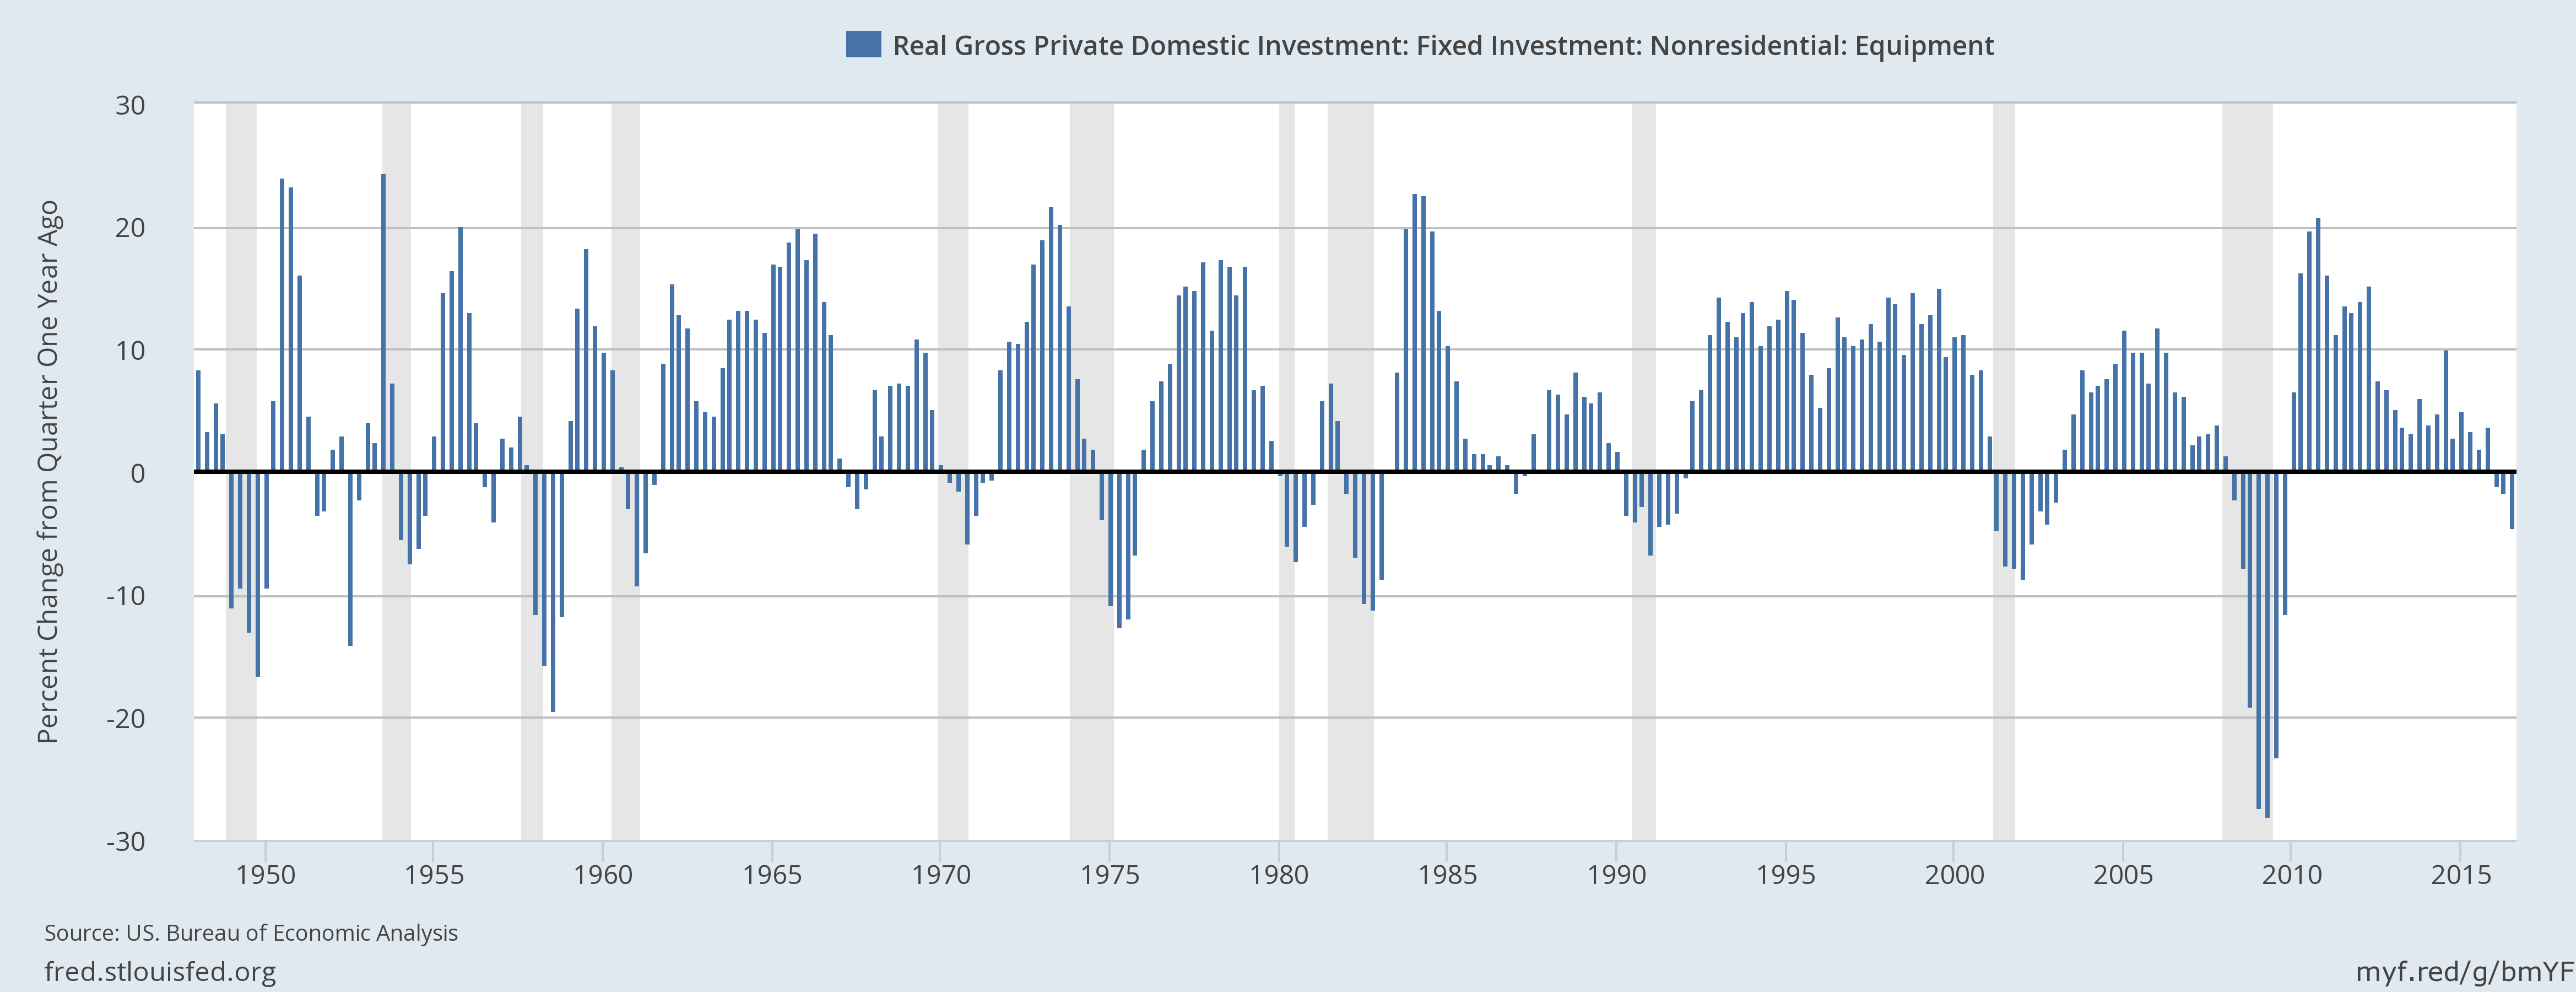 Real Gross Private Domestic Investment 2